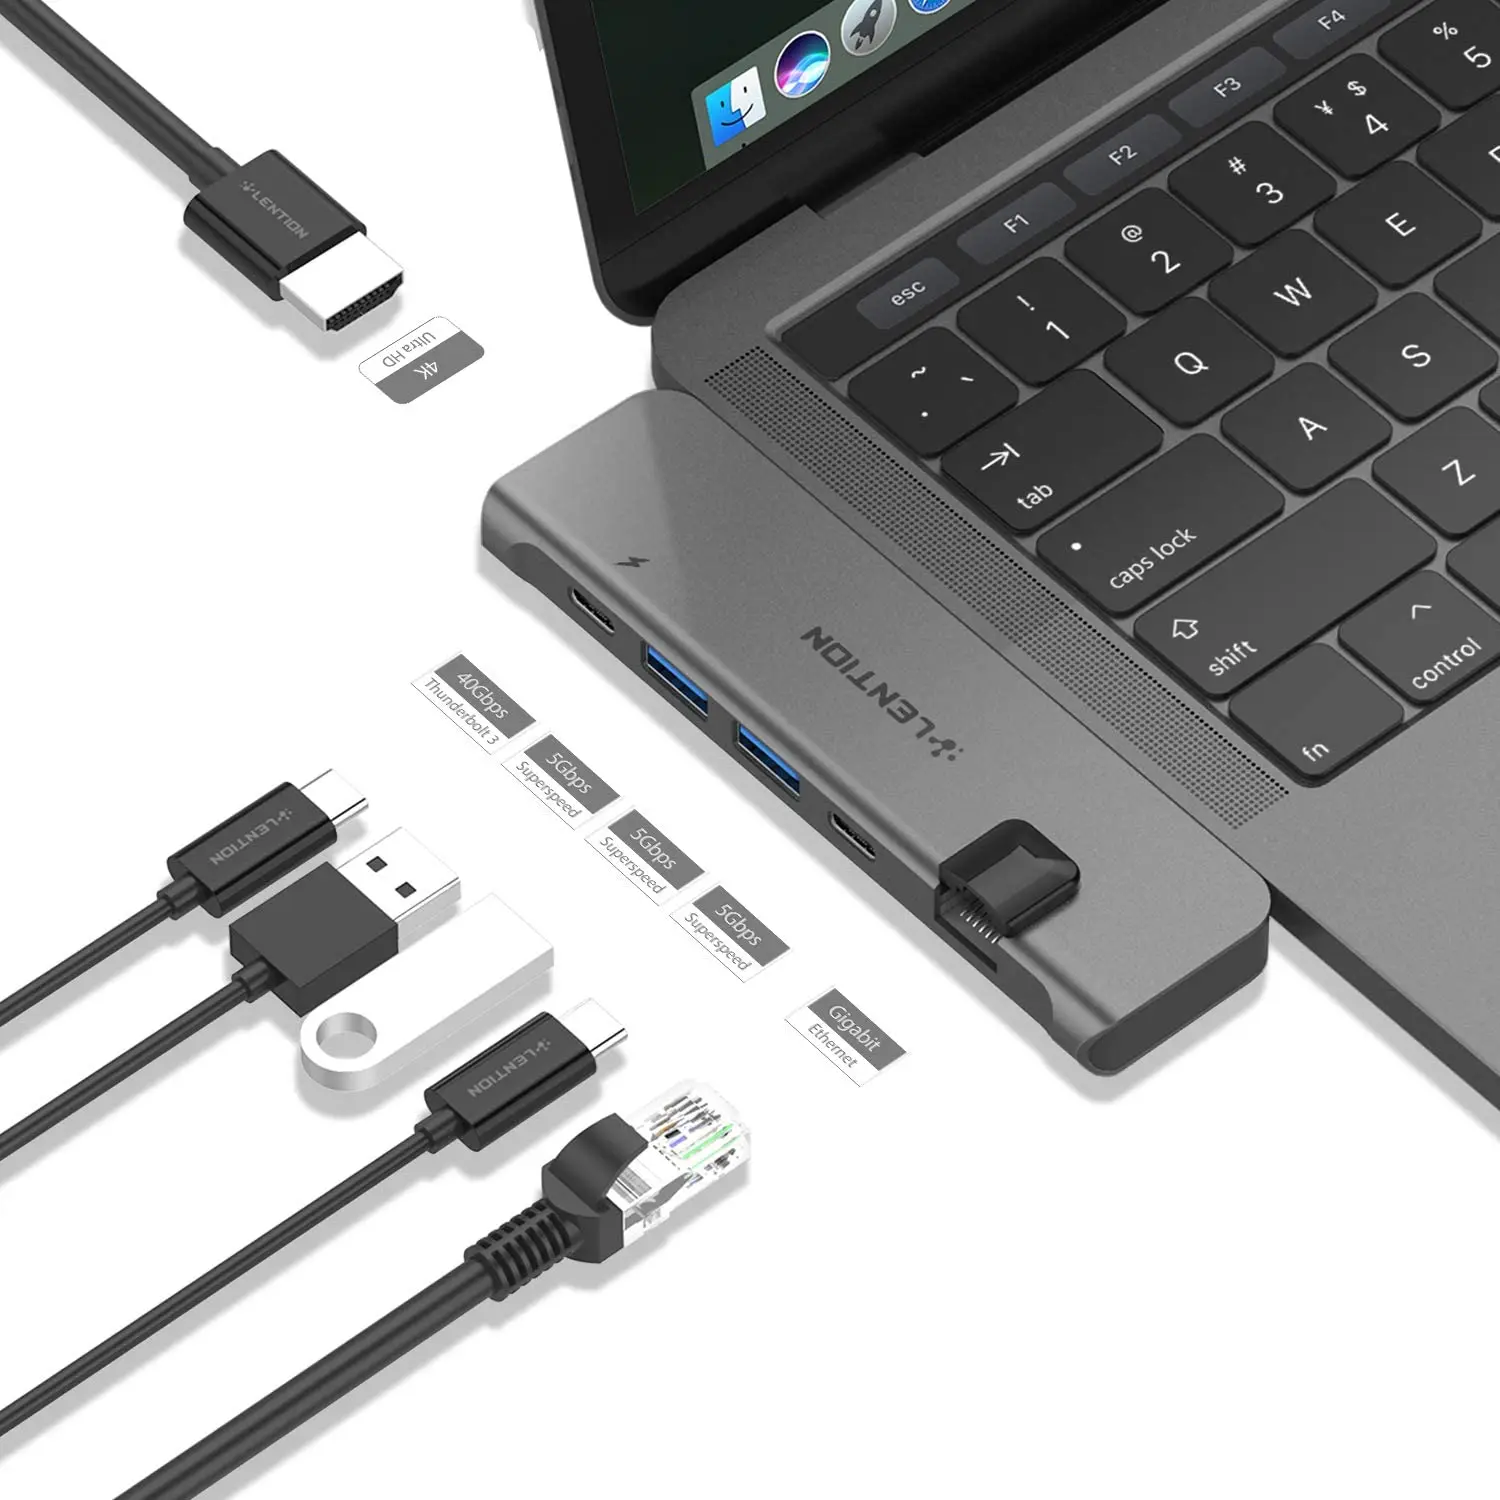 

Lention USB C Hub Type C 40Gbps Thunderbolt 3 60W Power Delivery 4K HDMI Gigabit Ethernet Adapter for New MacBook Pro Air Mac